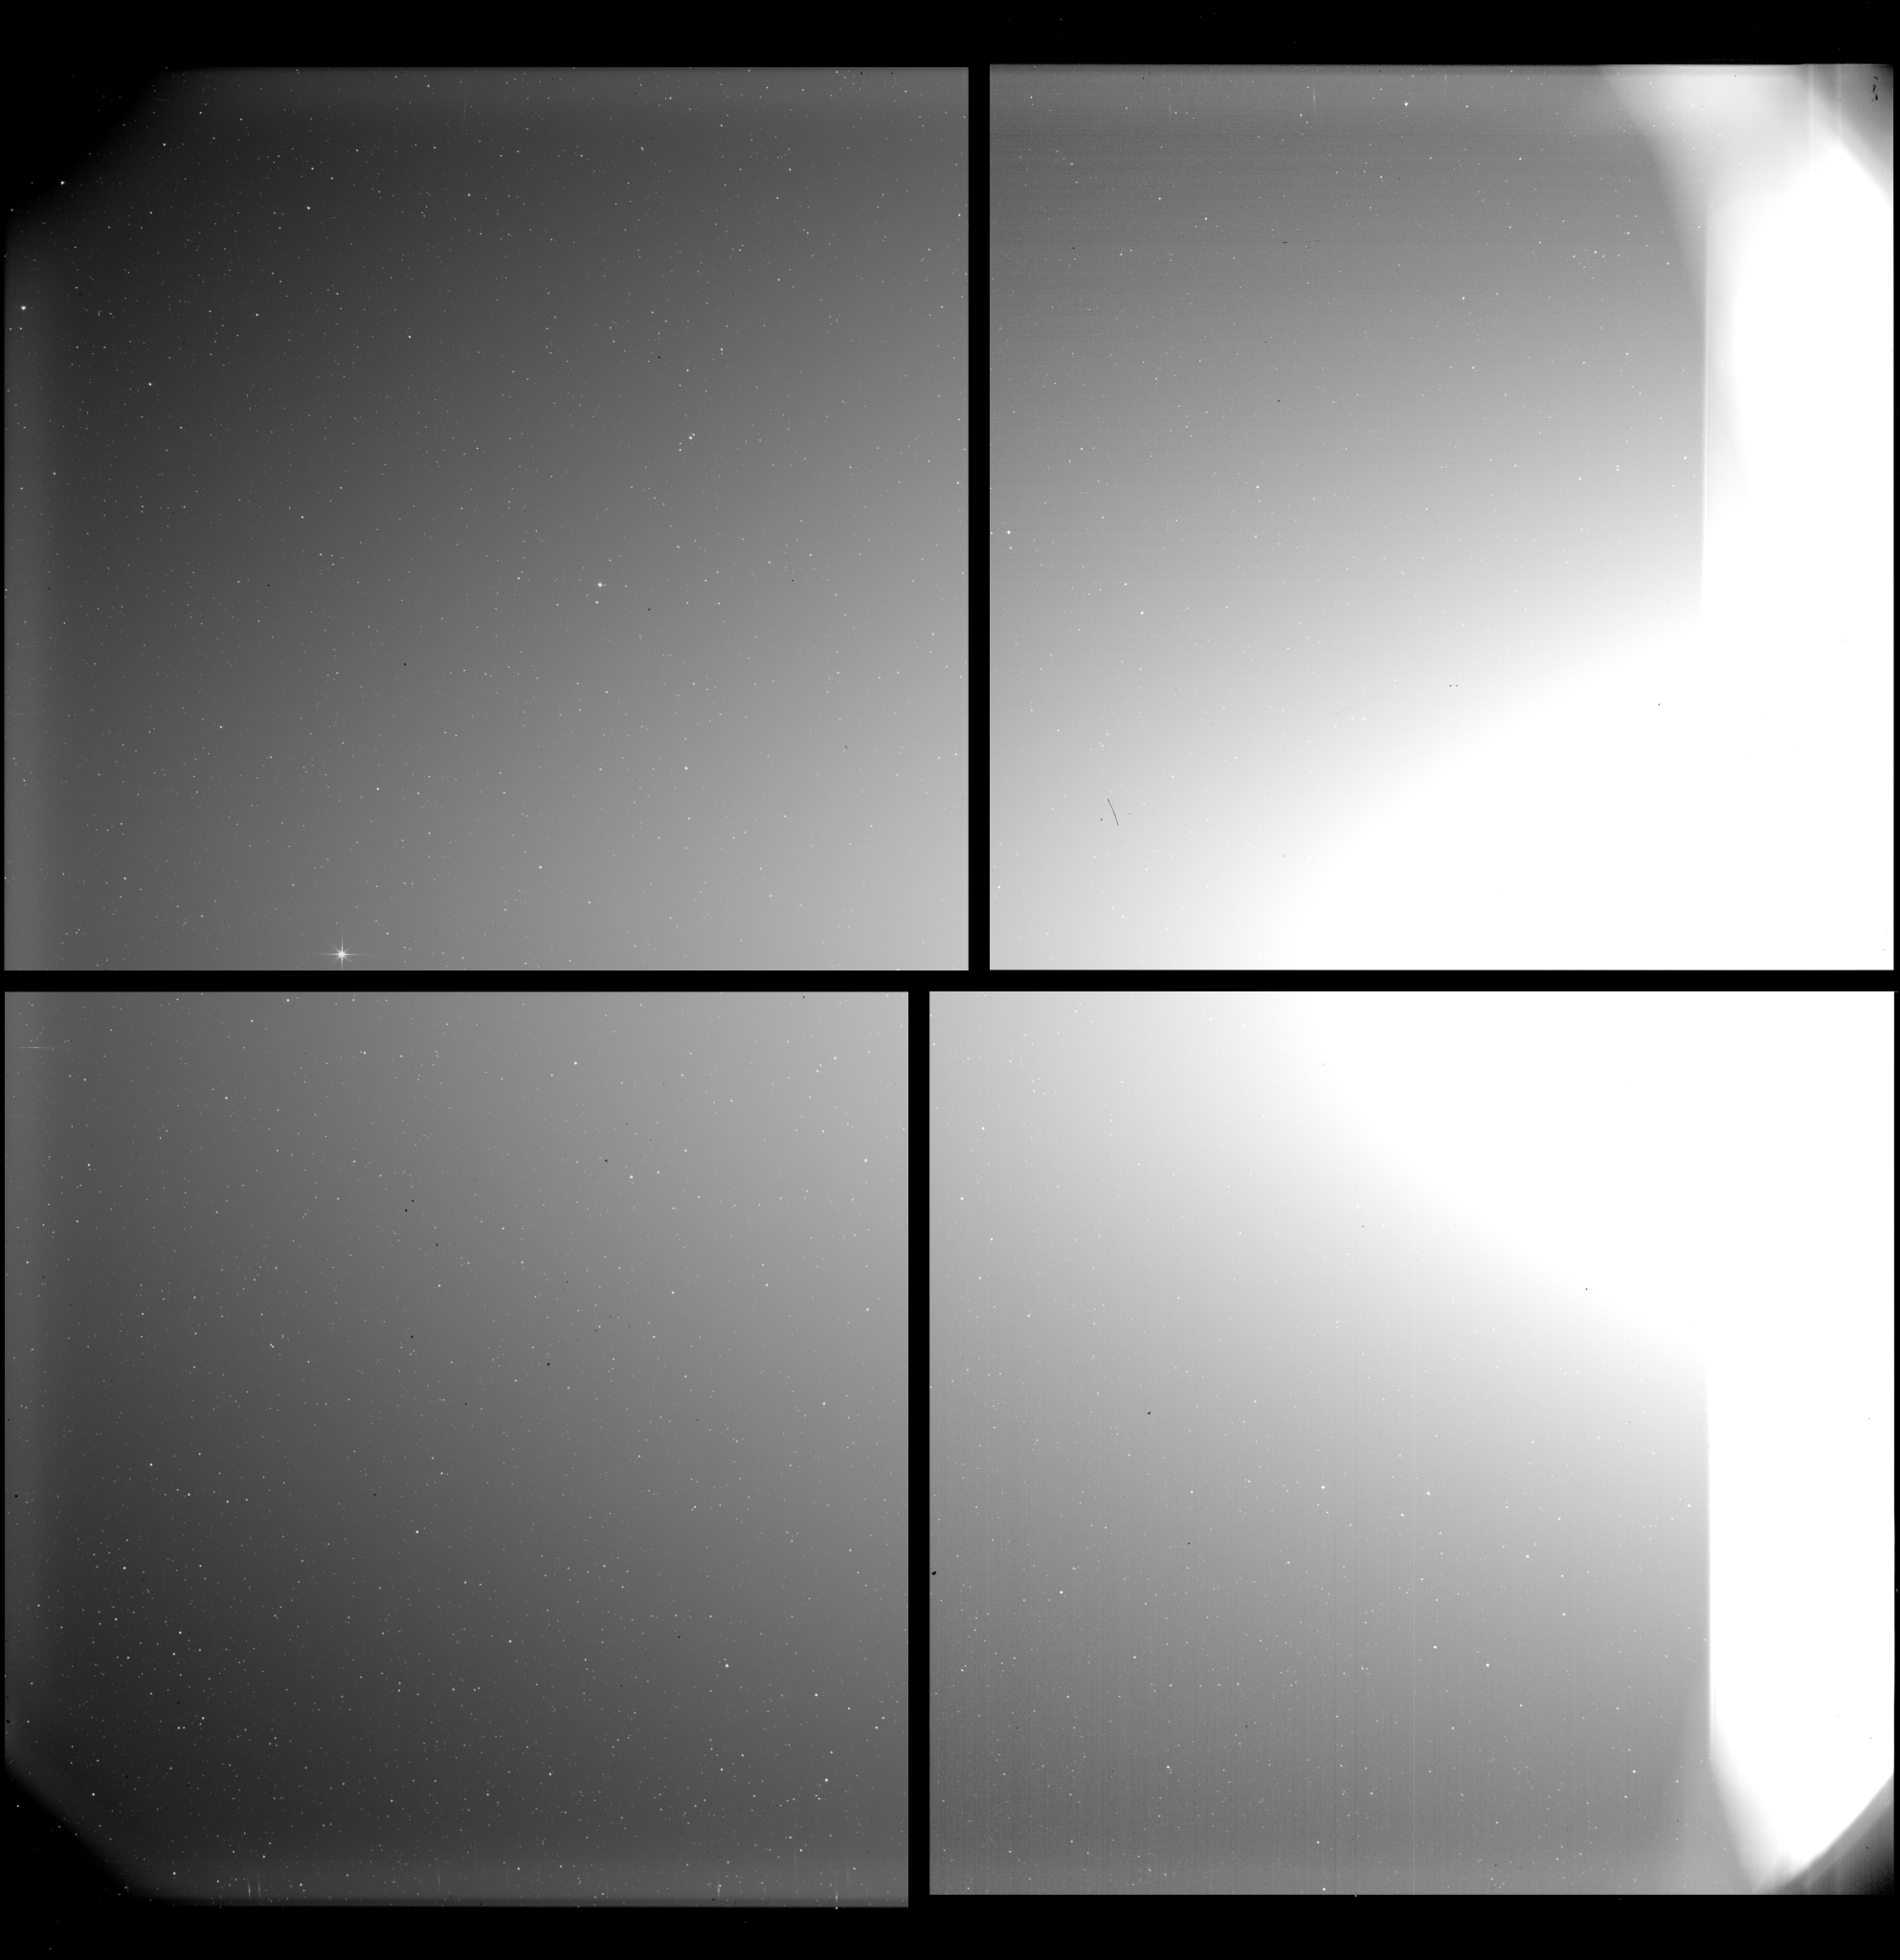 A mosaic of four images show a starry sky with a bright white glow extending from the right side of the mosaic toward the center and covering the entire mosaic in a white haze that dims farther to the left. A bright white bar runs vertically along the right edge of the mosaic.